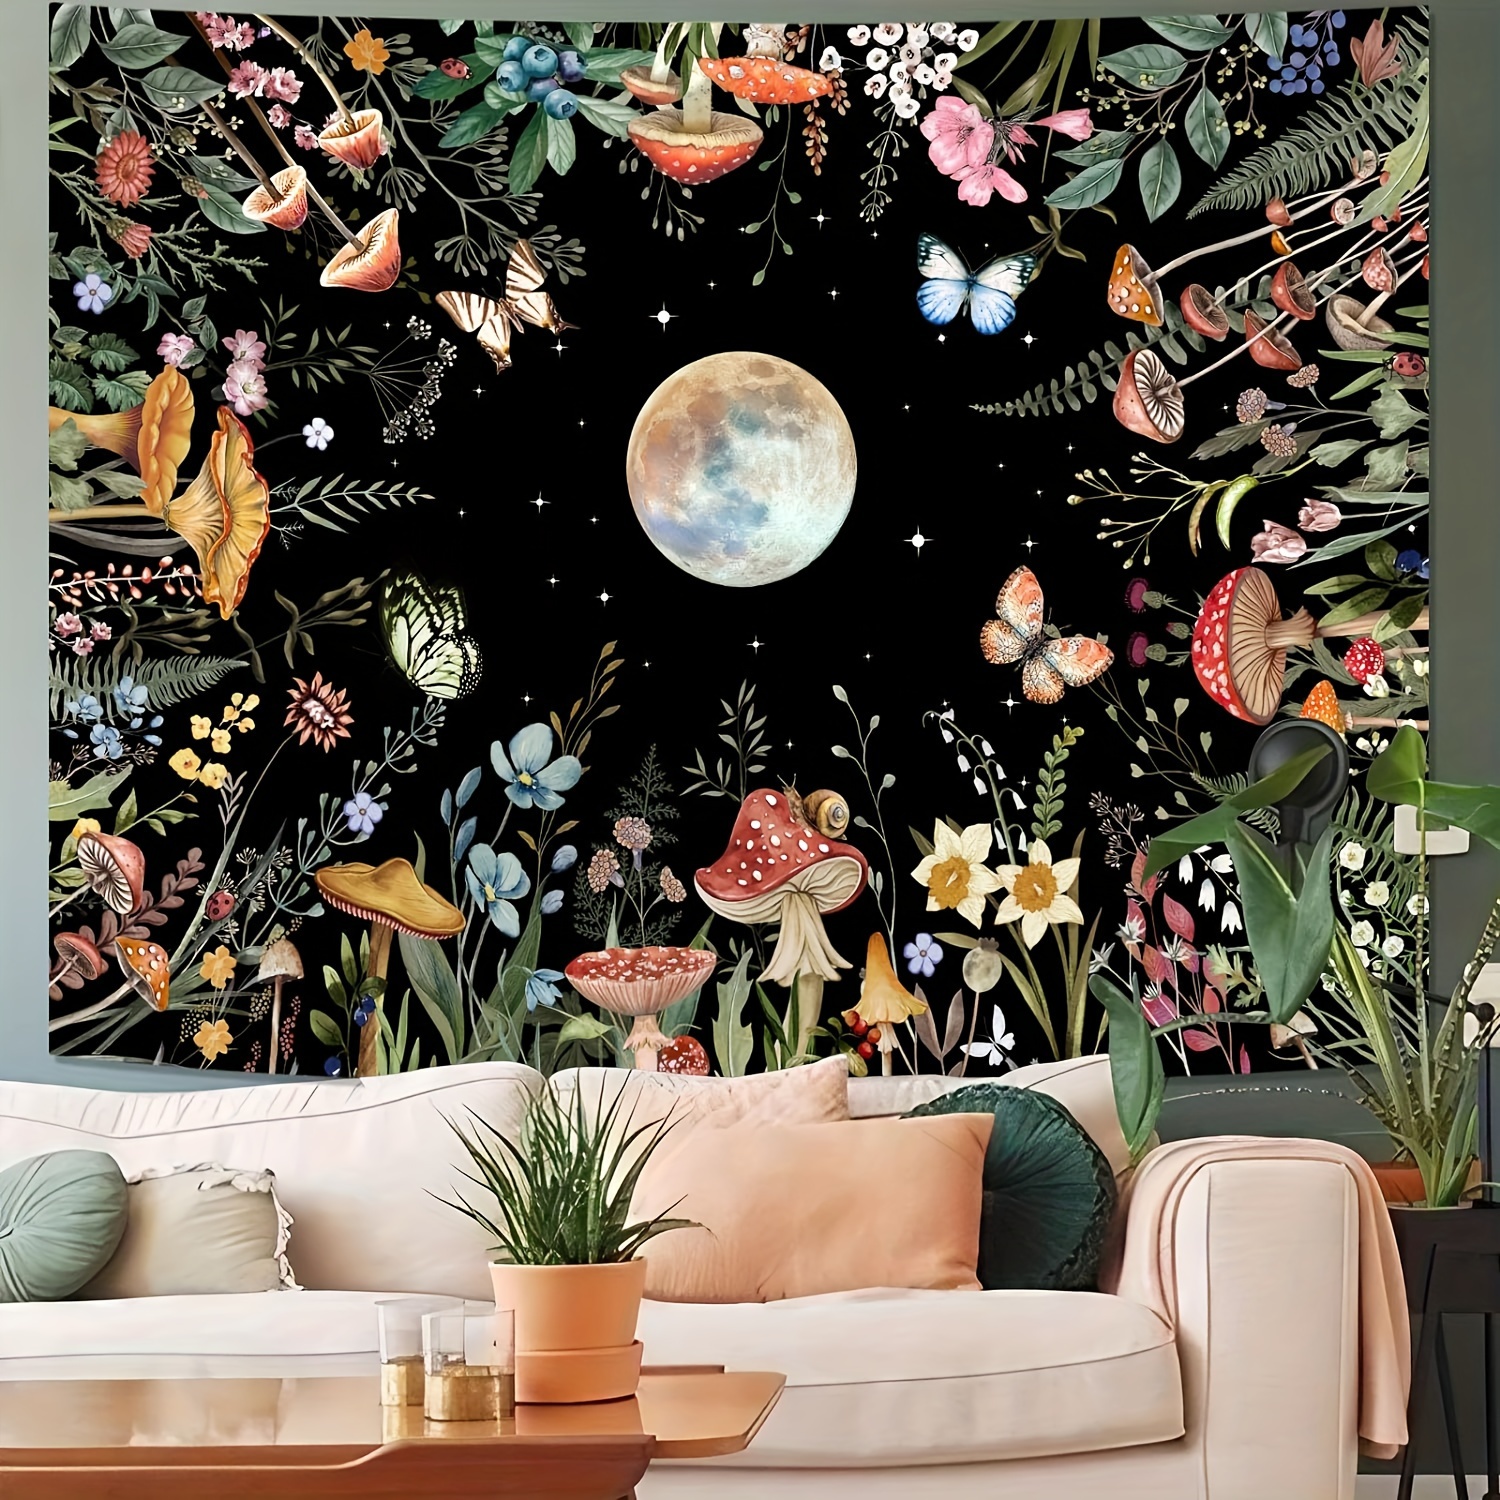 

1pc Flower & Mushroom Print Tapestry, Polyester Tapestry, Wall Hanging For Living Room Bedroom Office, Home Decor Room Decor Party Decor, With Free Installation Package